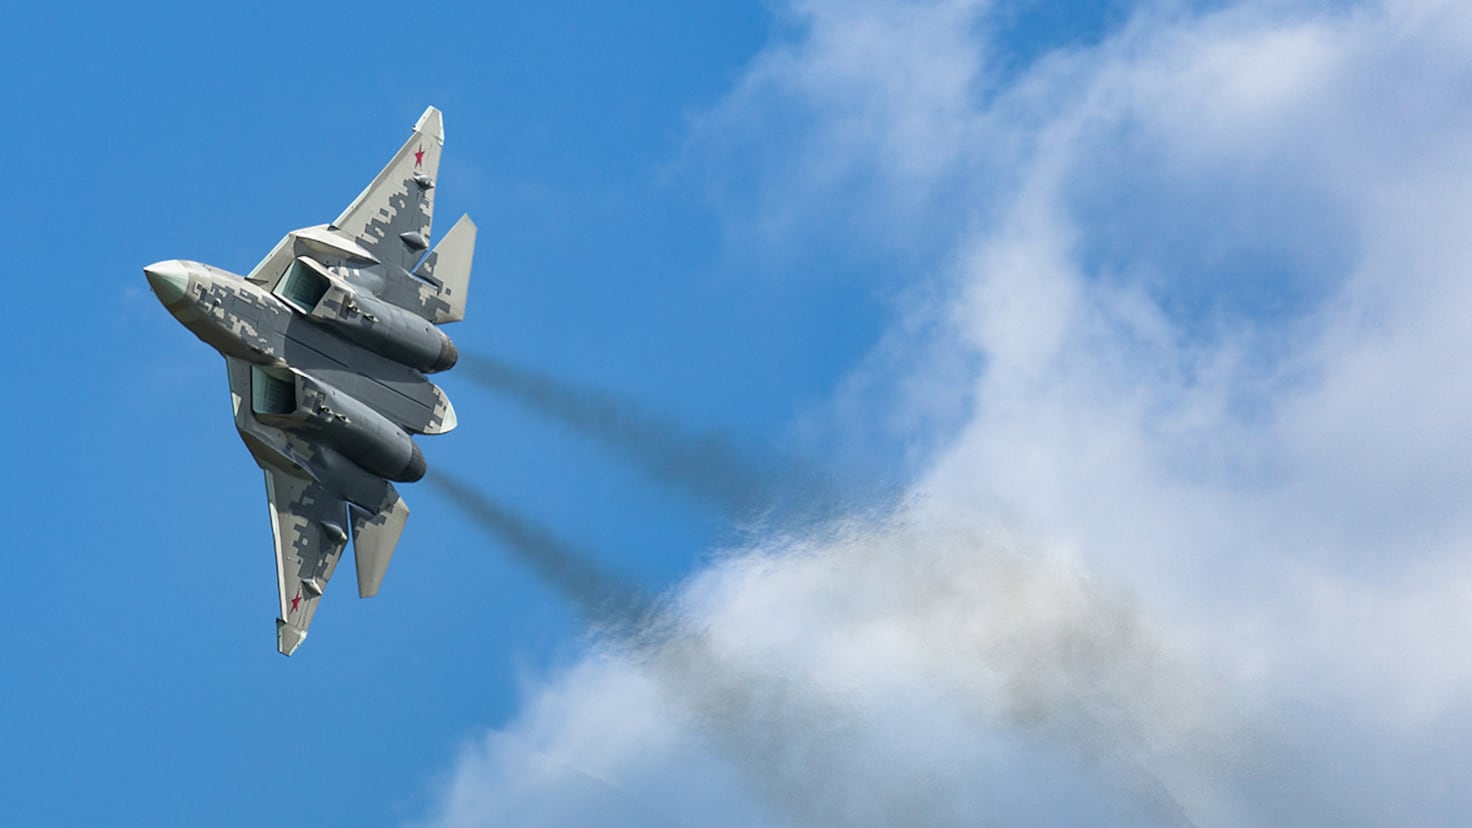 Ukraine damages Russia's most modern fighter for the first time in history
